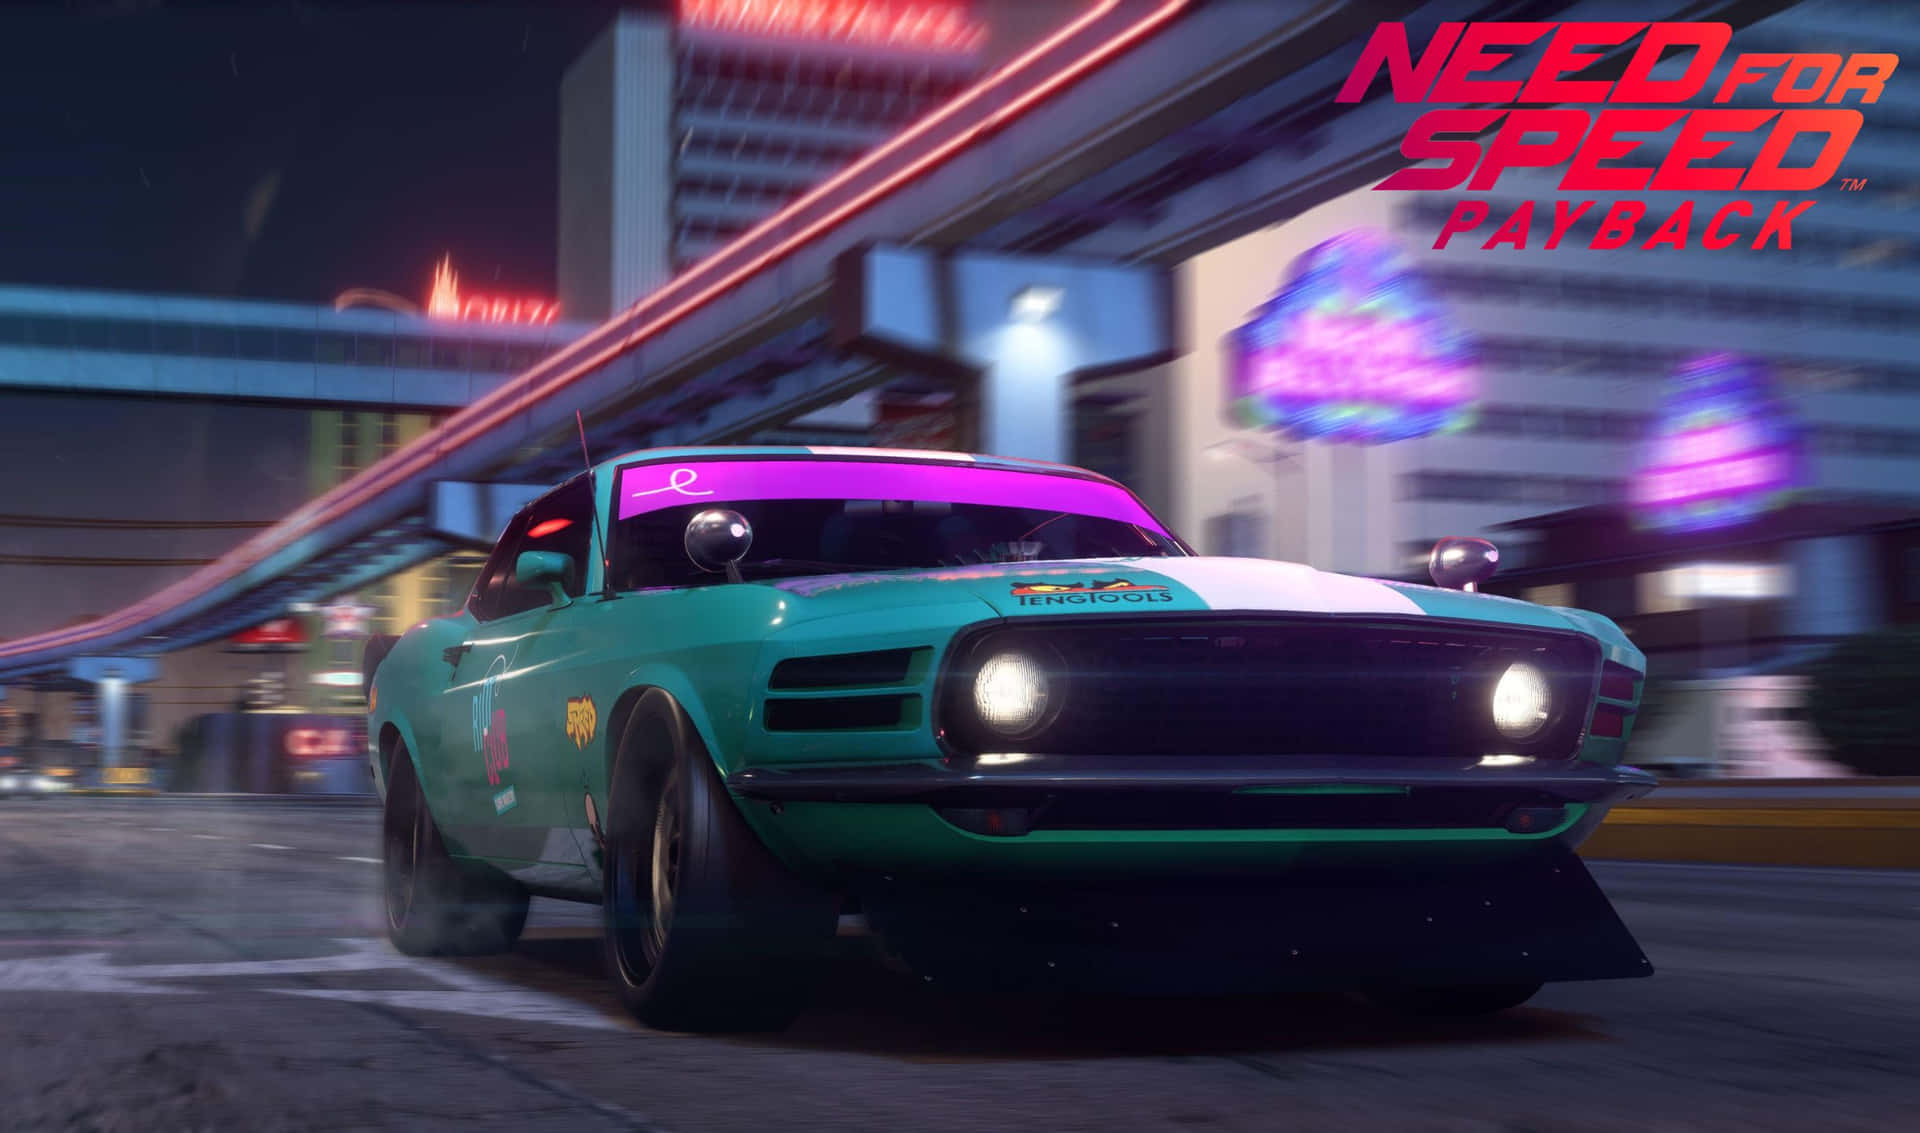 Take the wheel of the Dream Car in Need For Speed Payback!